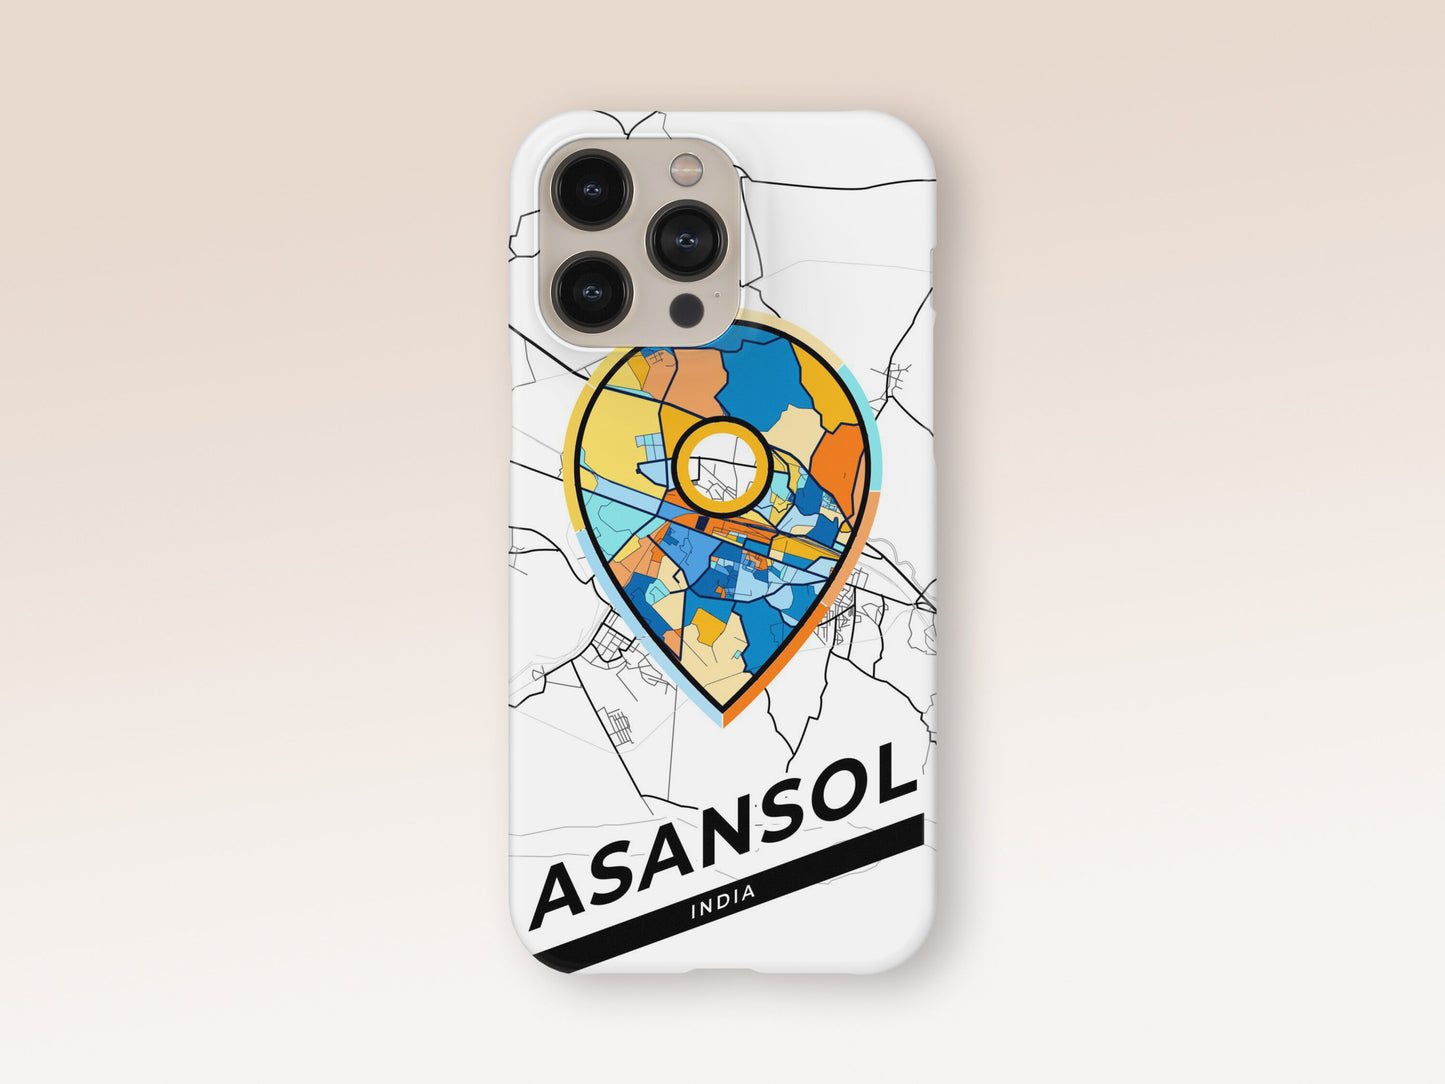 Asansol India slim phone case with colorful icon. Birthday, wedding or housewarming gift. Couple match cases. 1